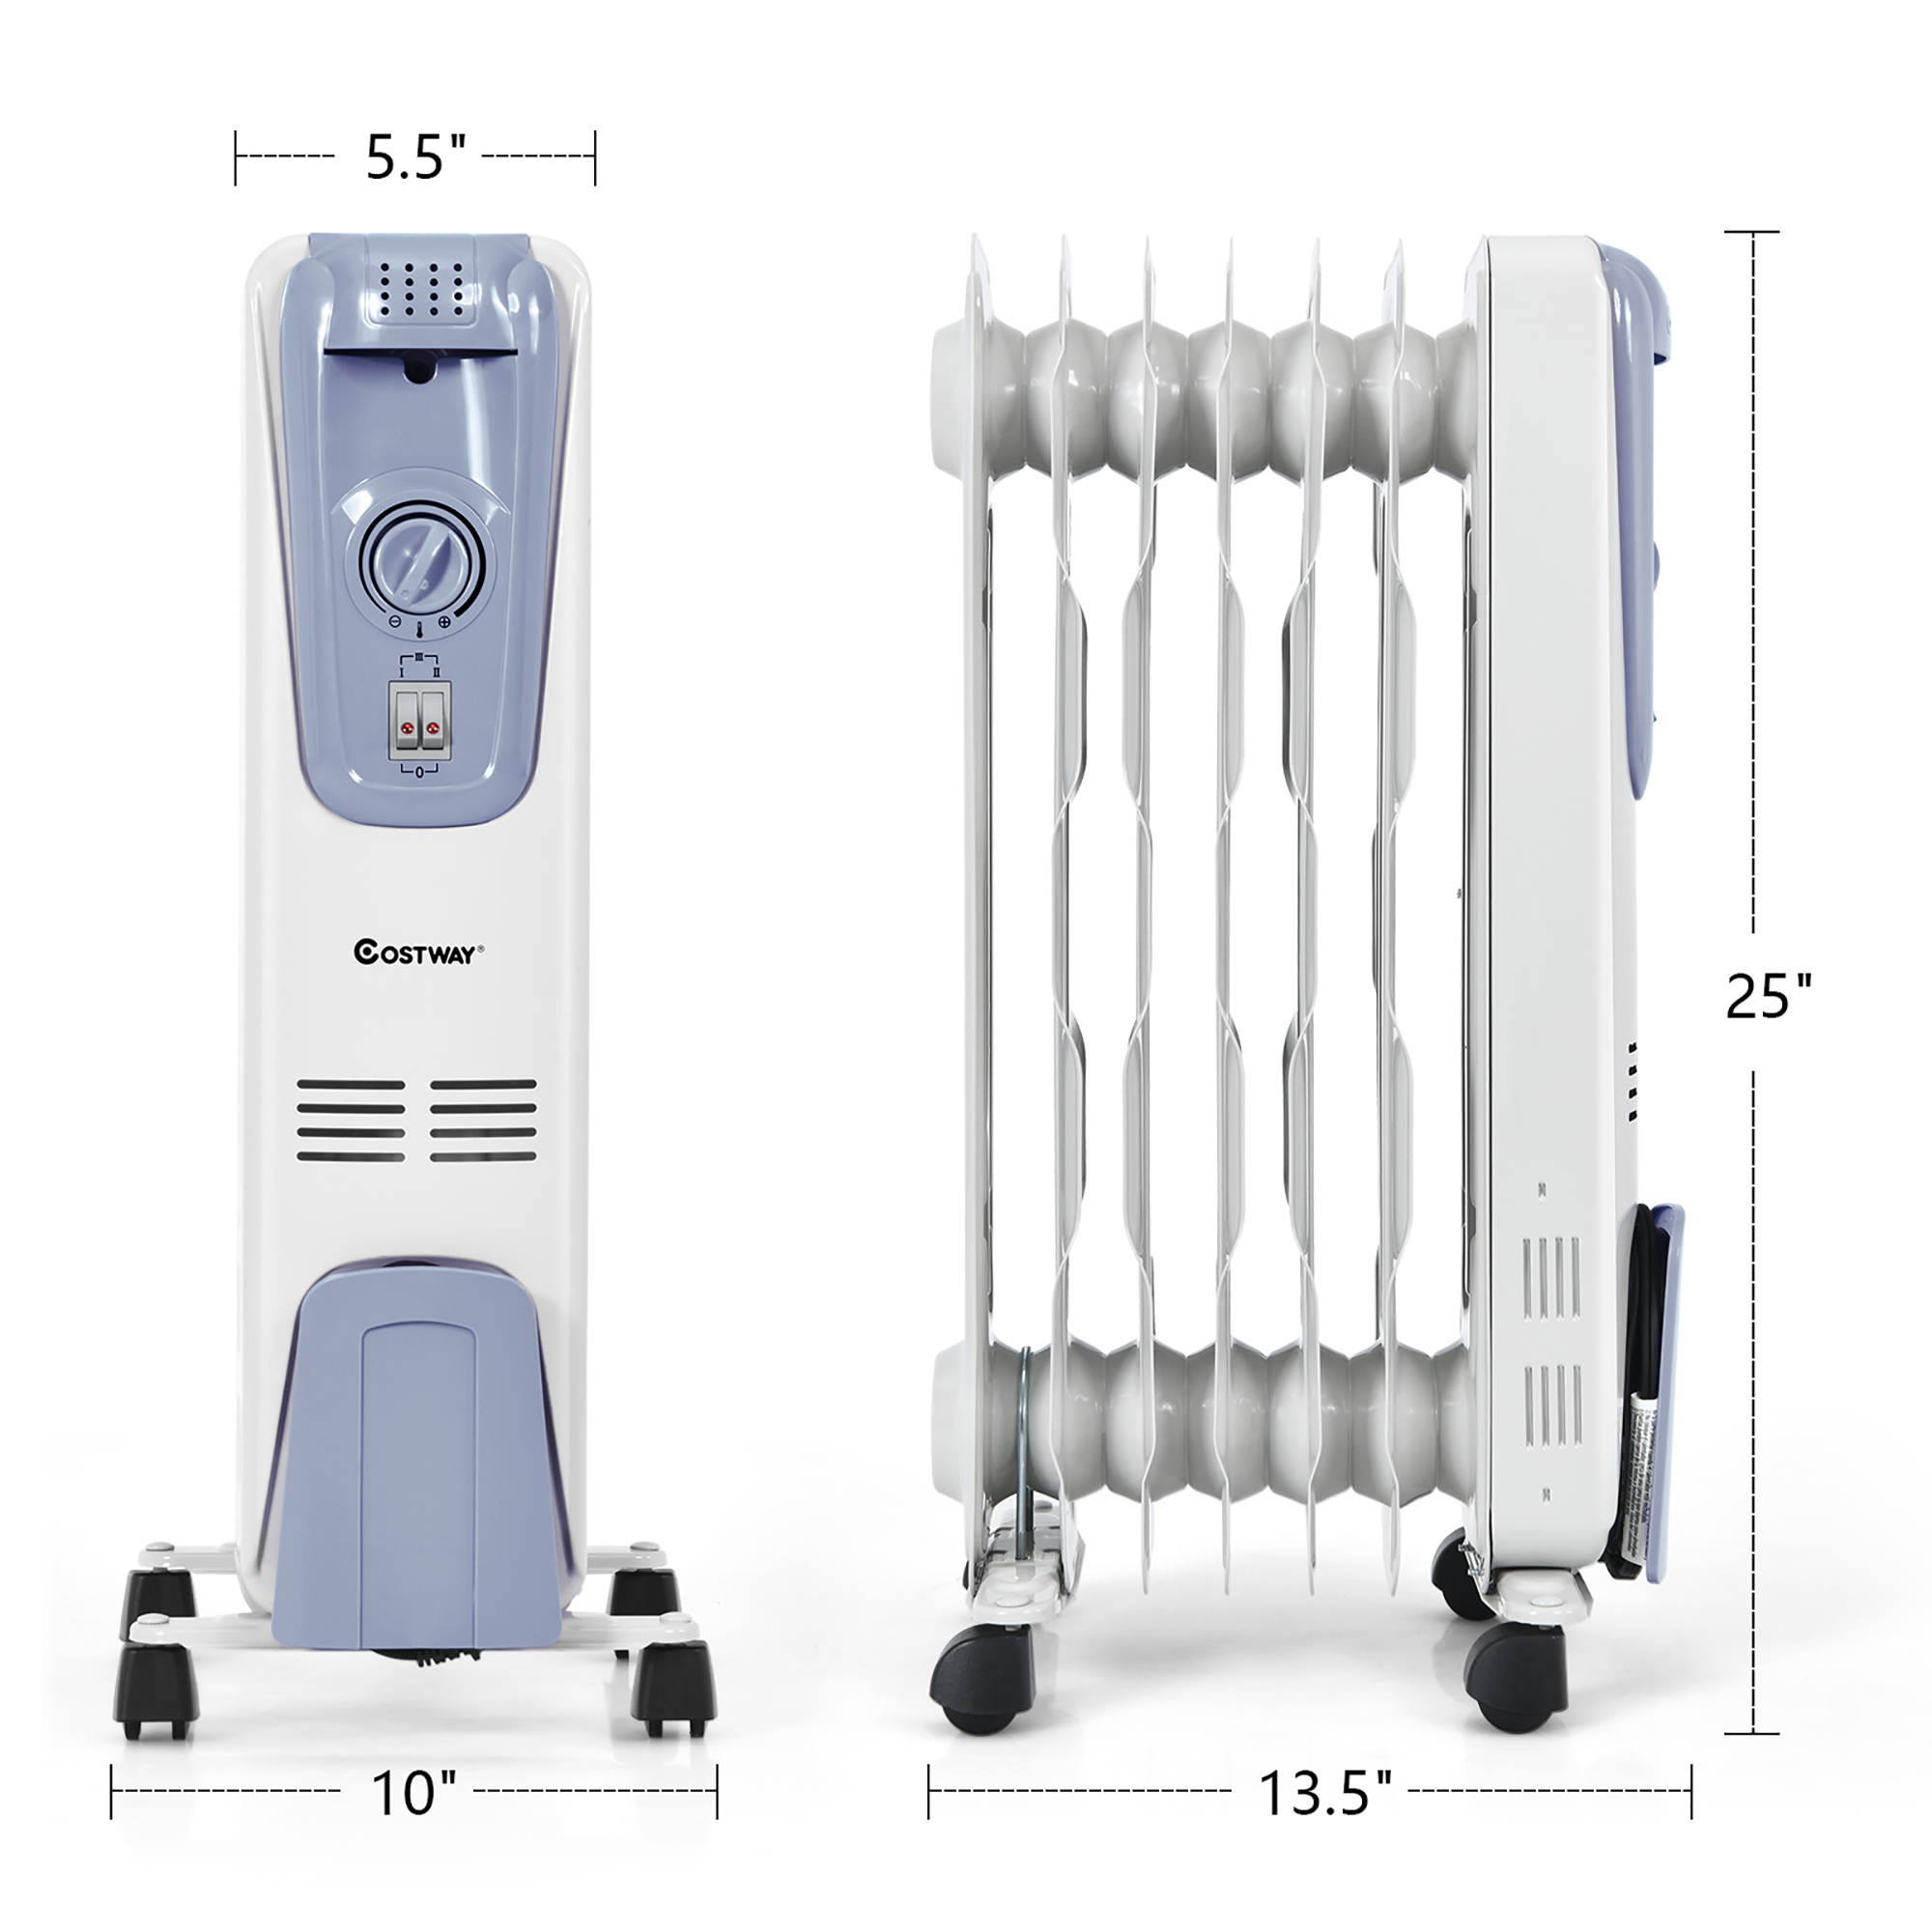 Costway 1500W Electric Oil Filled Radiator Space Heater 7-Fin Thermostat Room Radiant - image 3 of 9